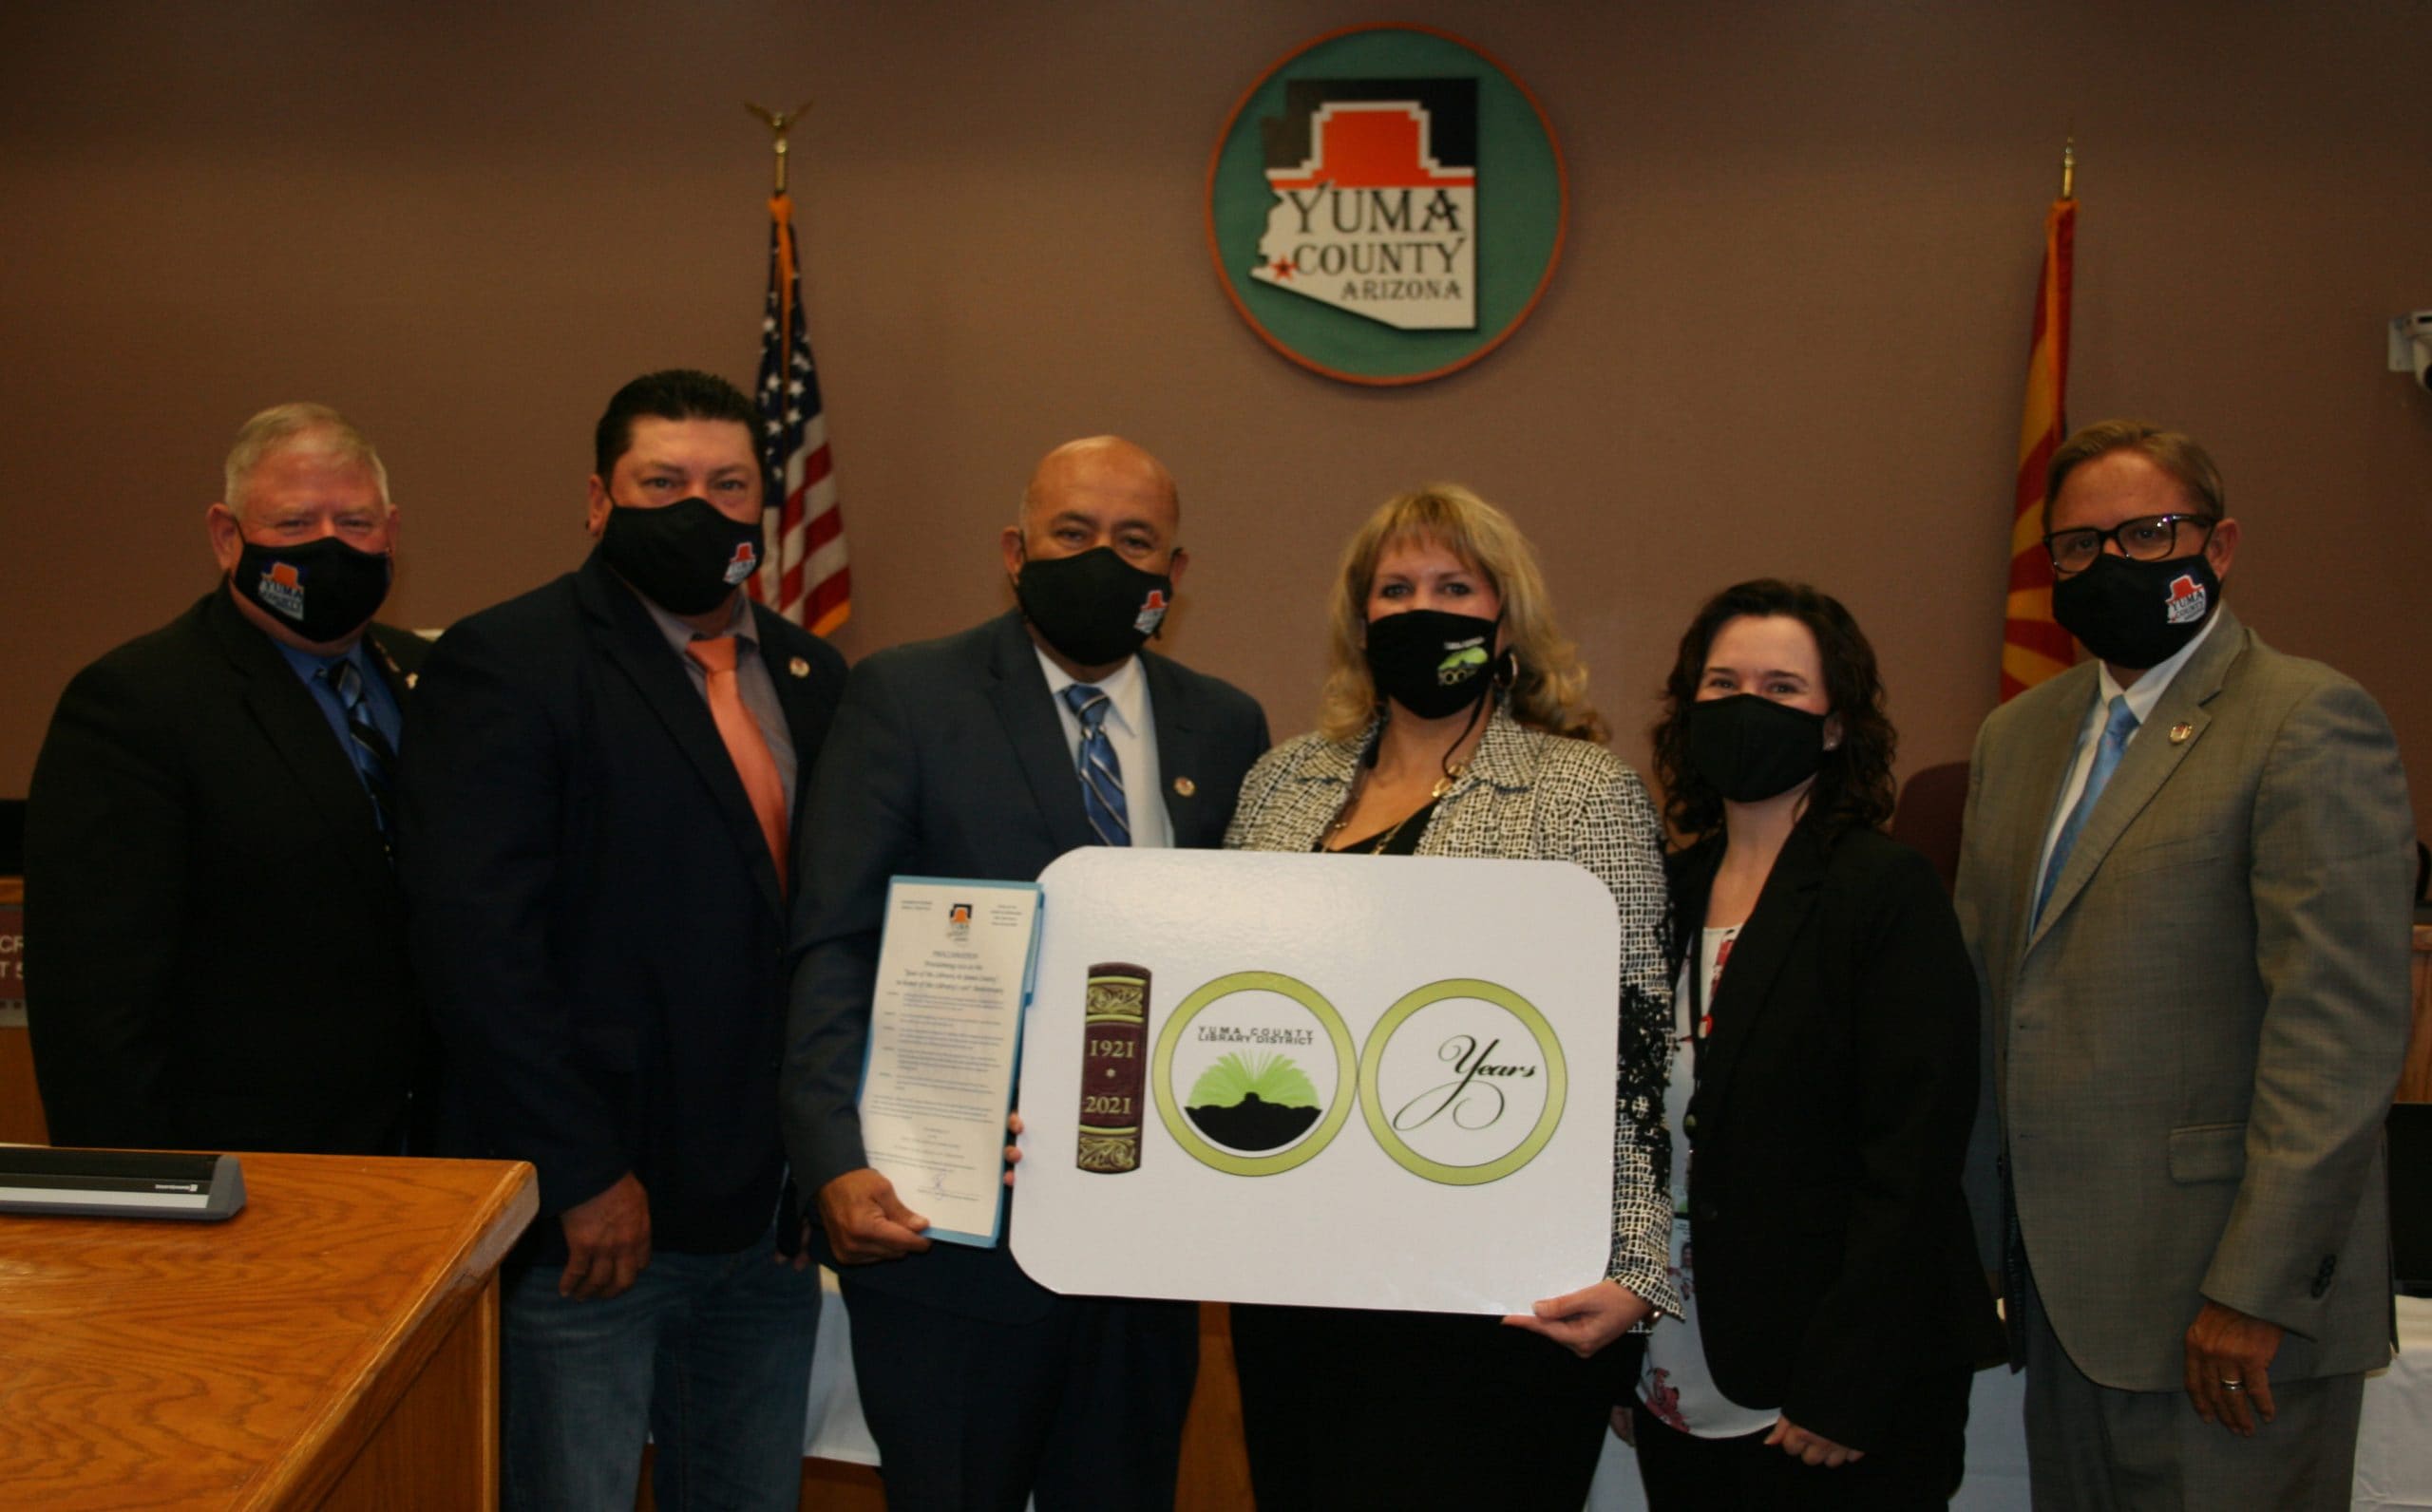 Centennial Proclamation by the Yuma County Board of Supervisors